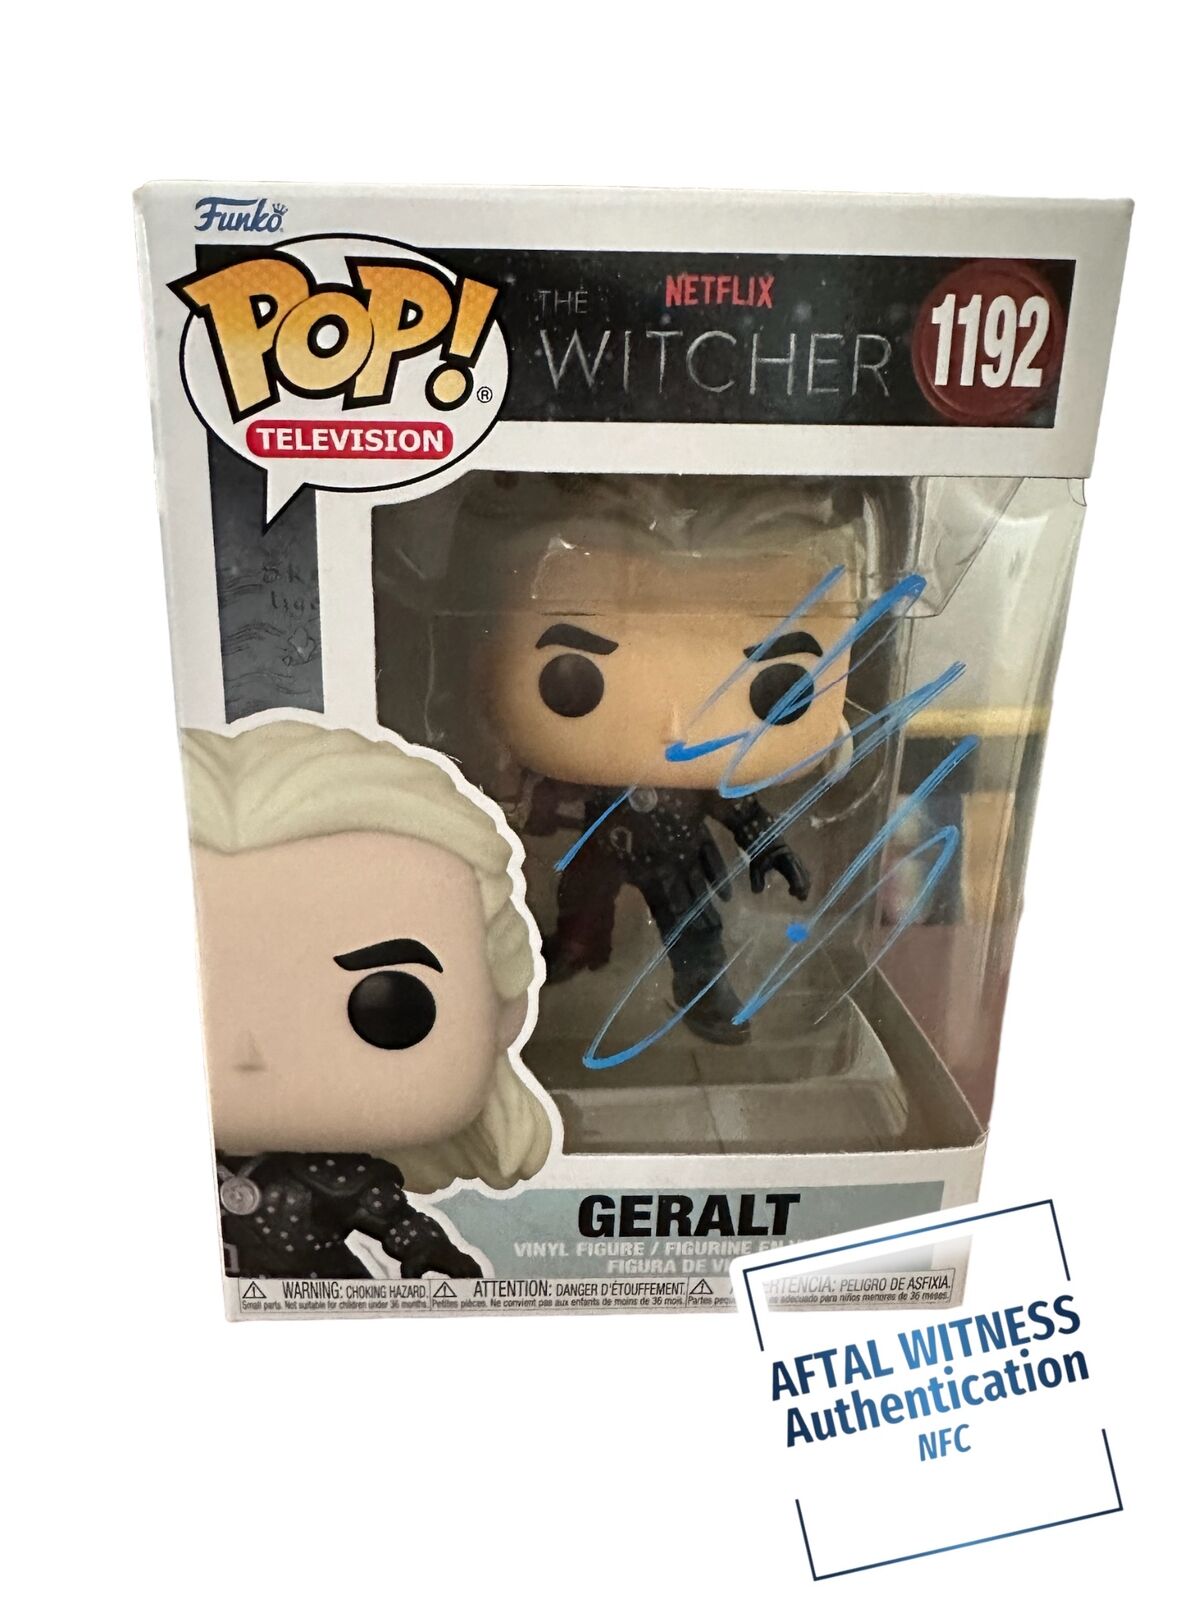 Henry Cavill Signed The Witcher Funko Pop AFTAL WITNESS NFC